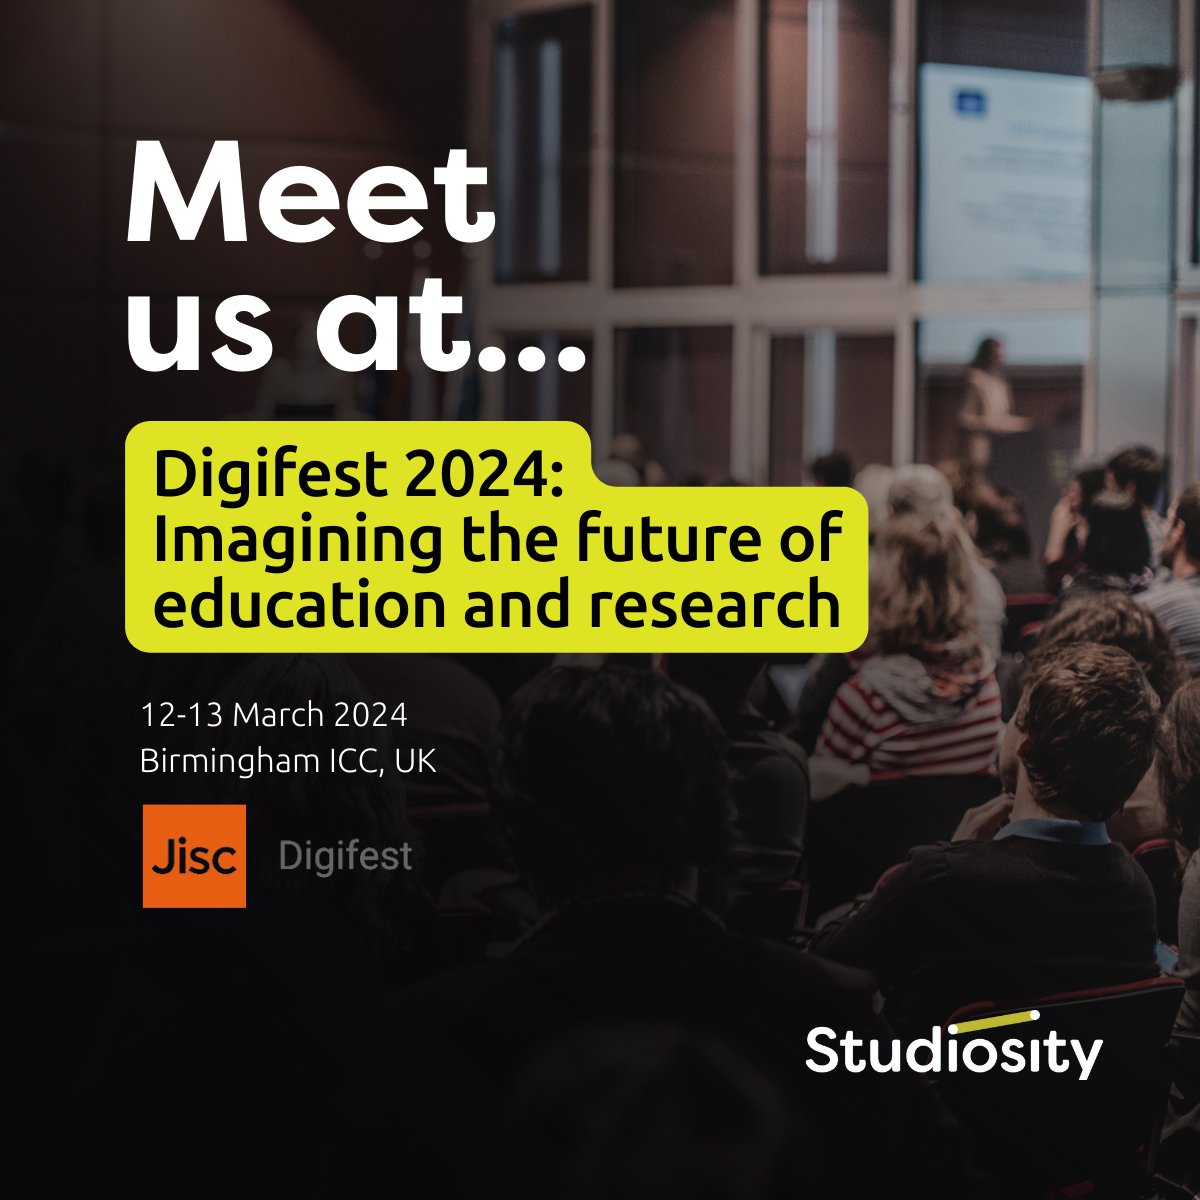 Stop by and visit the Studiosity stand today for a live demo of how our unique, ethical AI learning technology can provide academic writing feedback in minutes - for all your students!🙌 @Jisc #digifest2024 #StudentSuccess